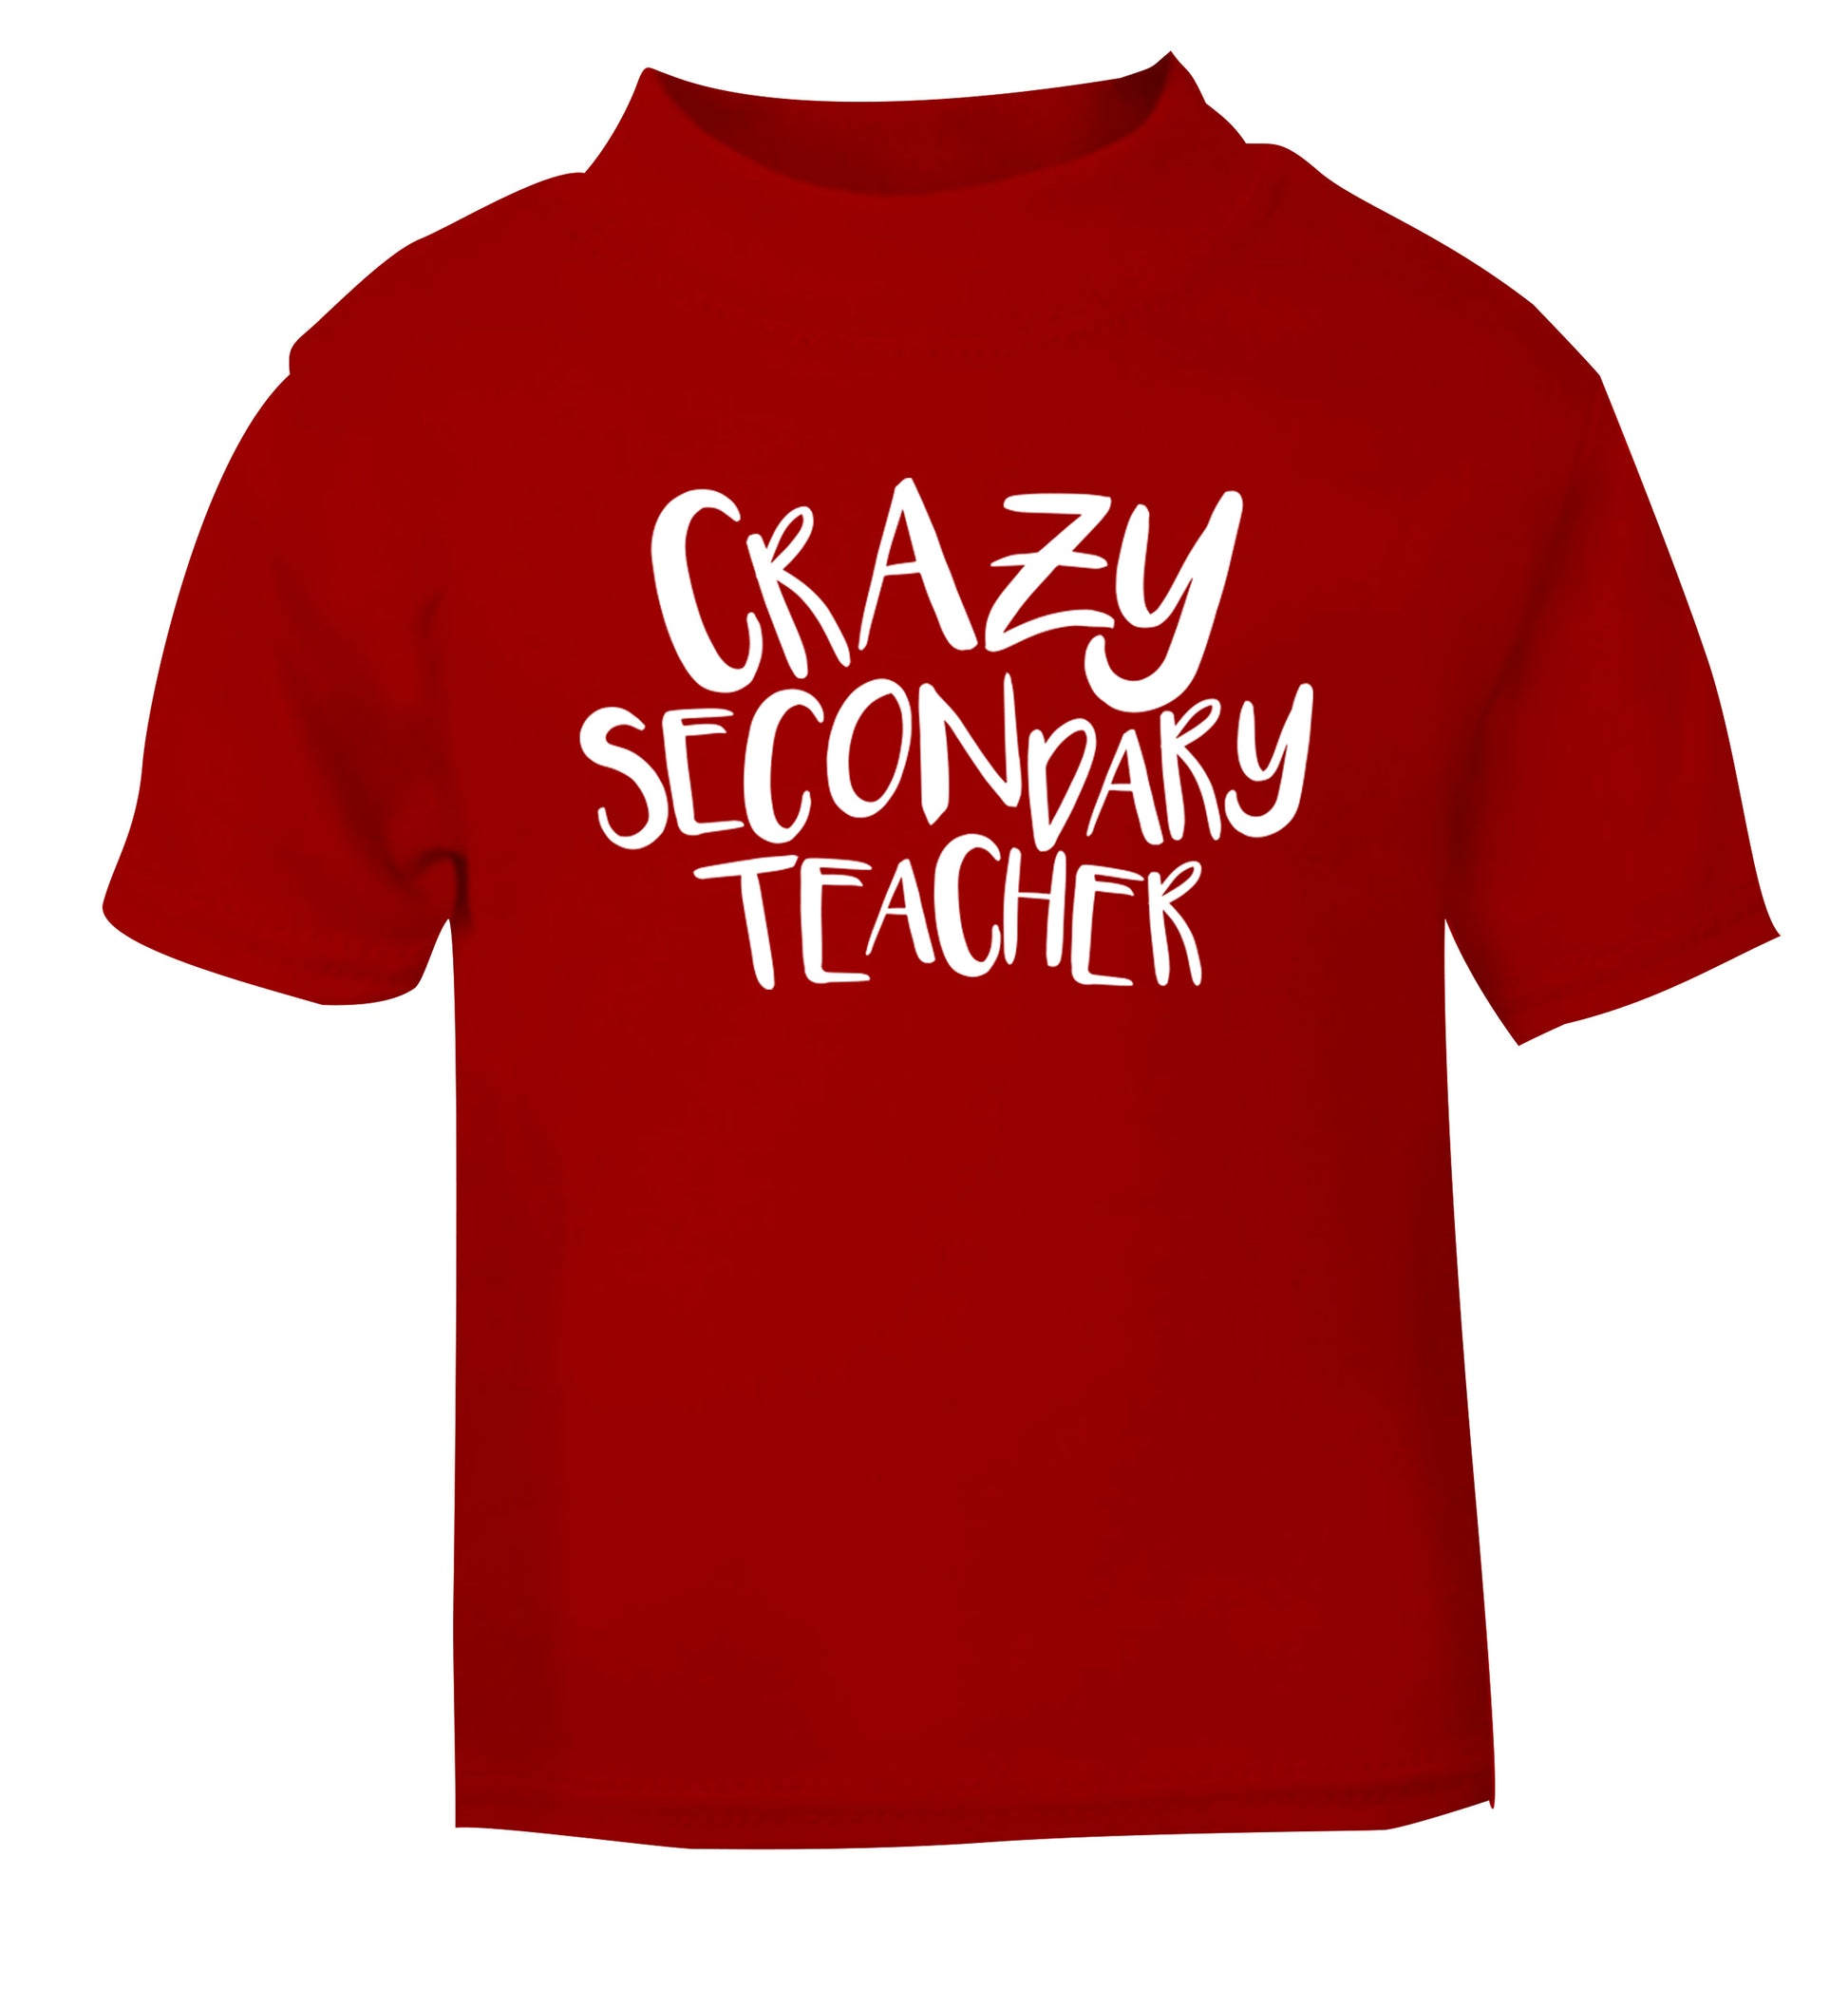 Crazy secondary teacher red Baby Toddler Tshirt 2 Years